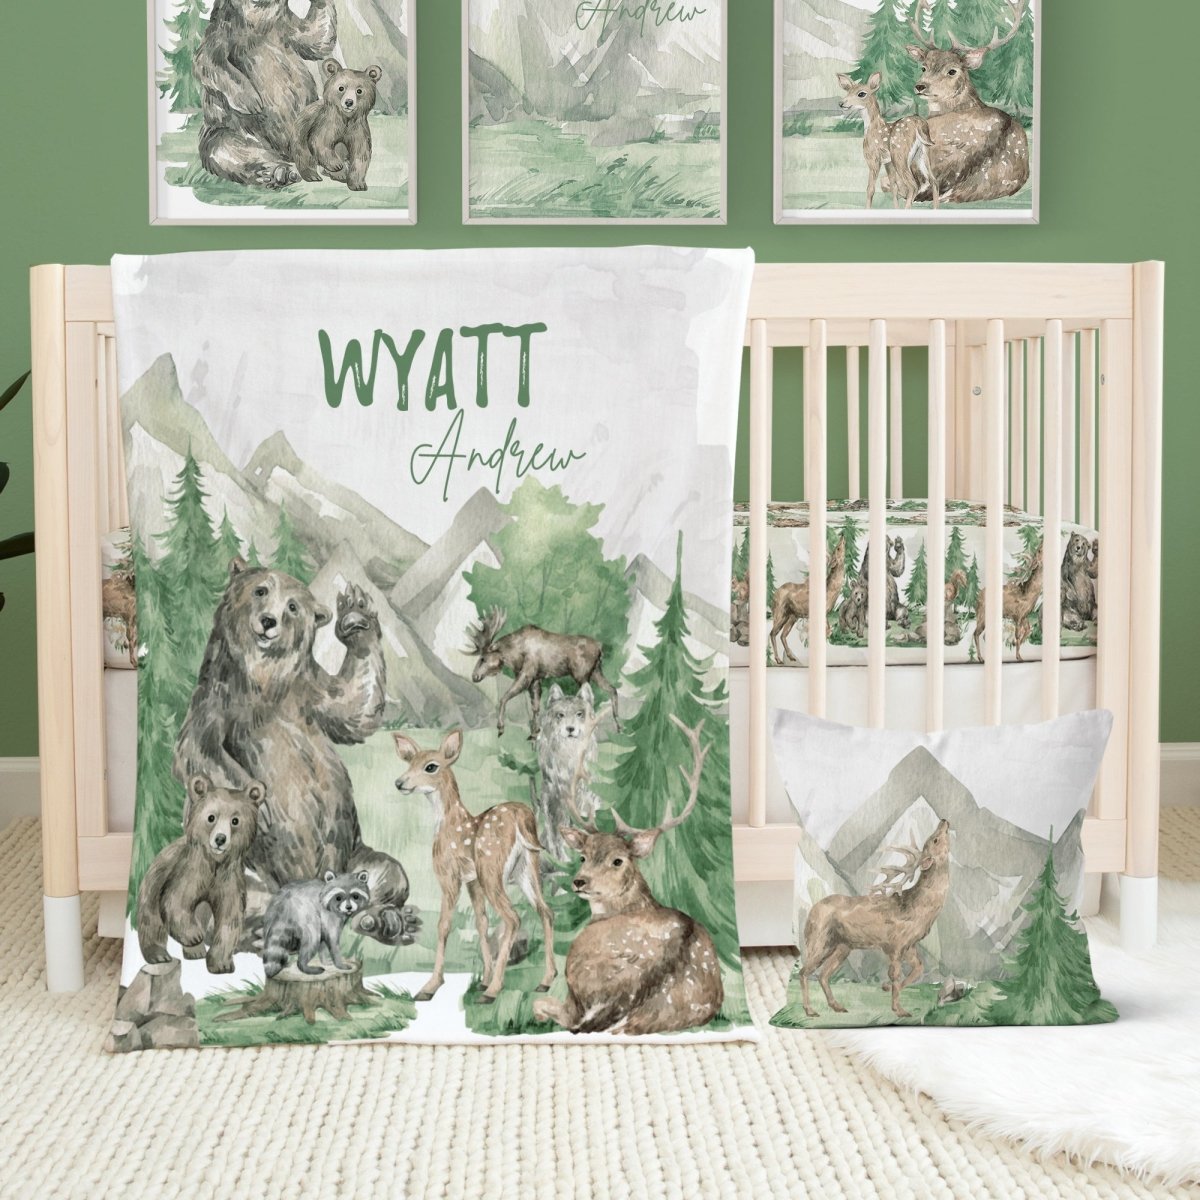 Sweet Forest Friends Personalized Crib Sheet - gender_boy, Personalized_Yes, text